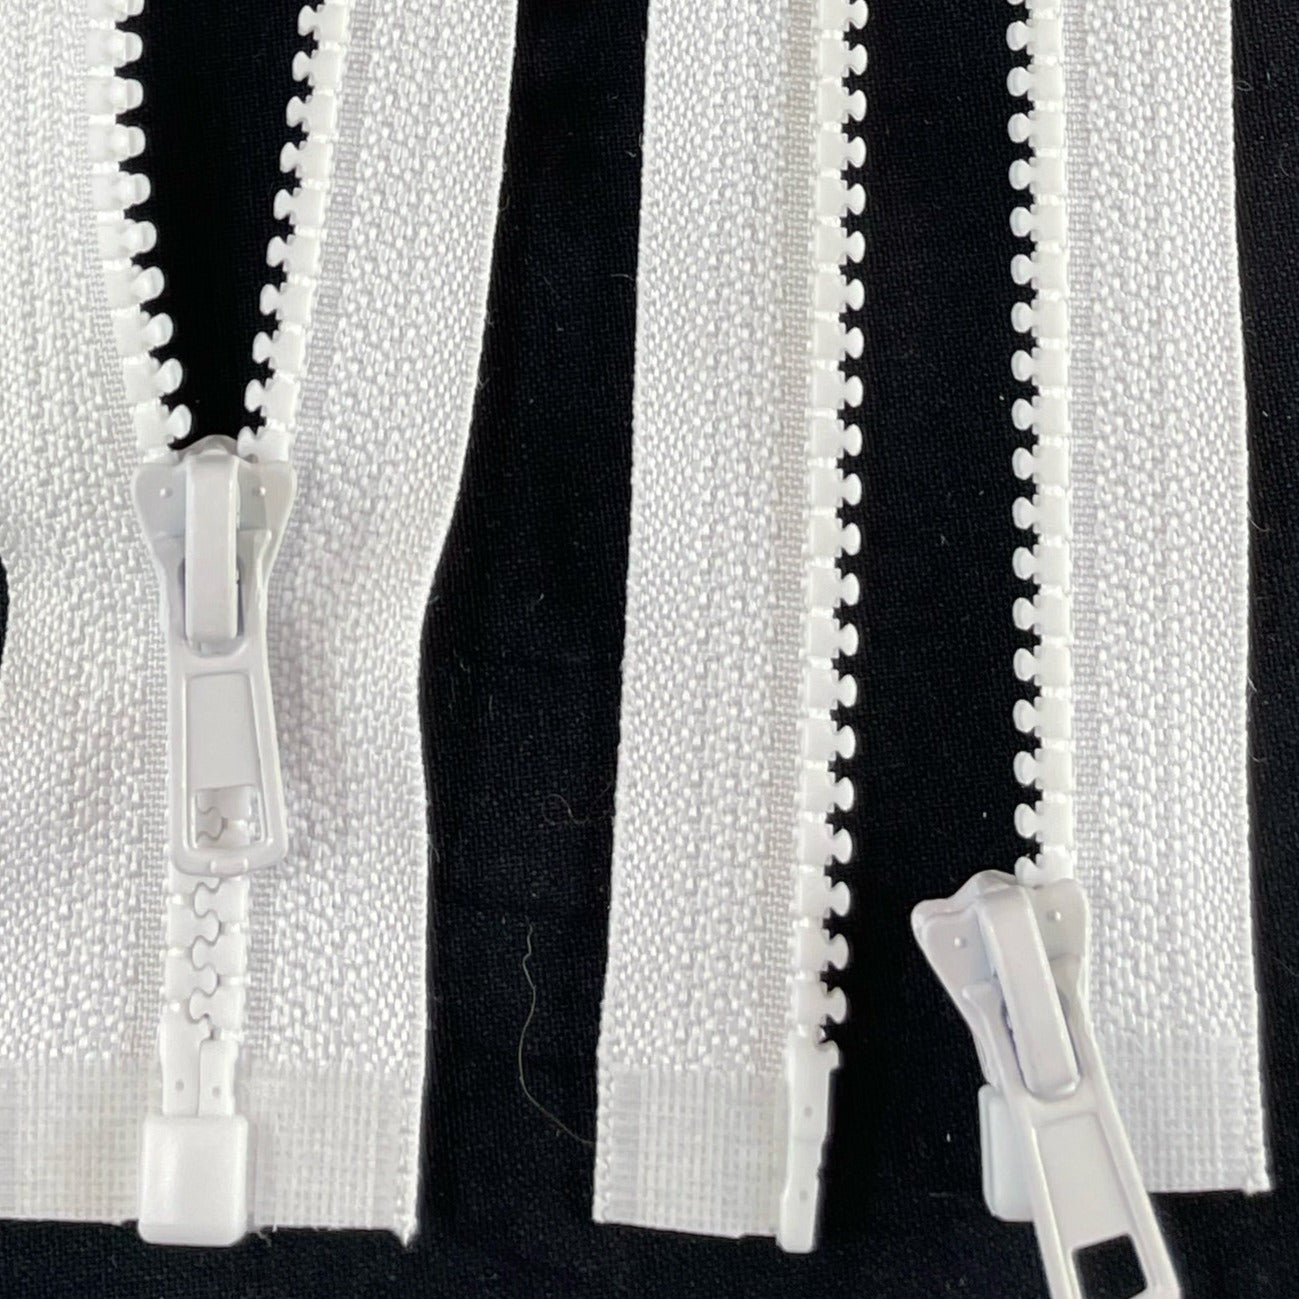 white Chunky open-ended zippers in Size 5: Robust and reliable zippers designed for heavy-duty applications. The chunky design ensures durability and strength, suitable for projects requiring sturdy closures. With open-ended functionality, they offer accessibility and ease of use for jackets, bags, and outdoor gear. Size 5 provides ample width for secure fastening, making these zippers ideal for projects that demand both style and substance.